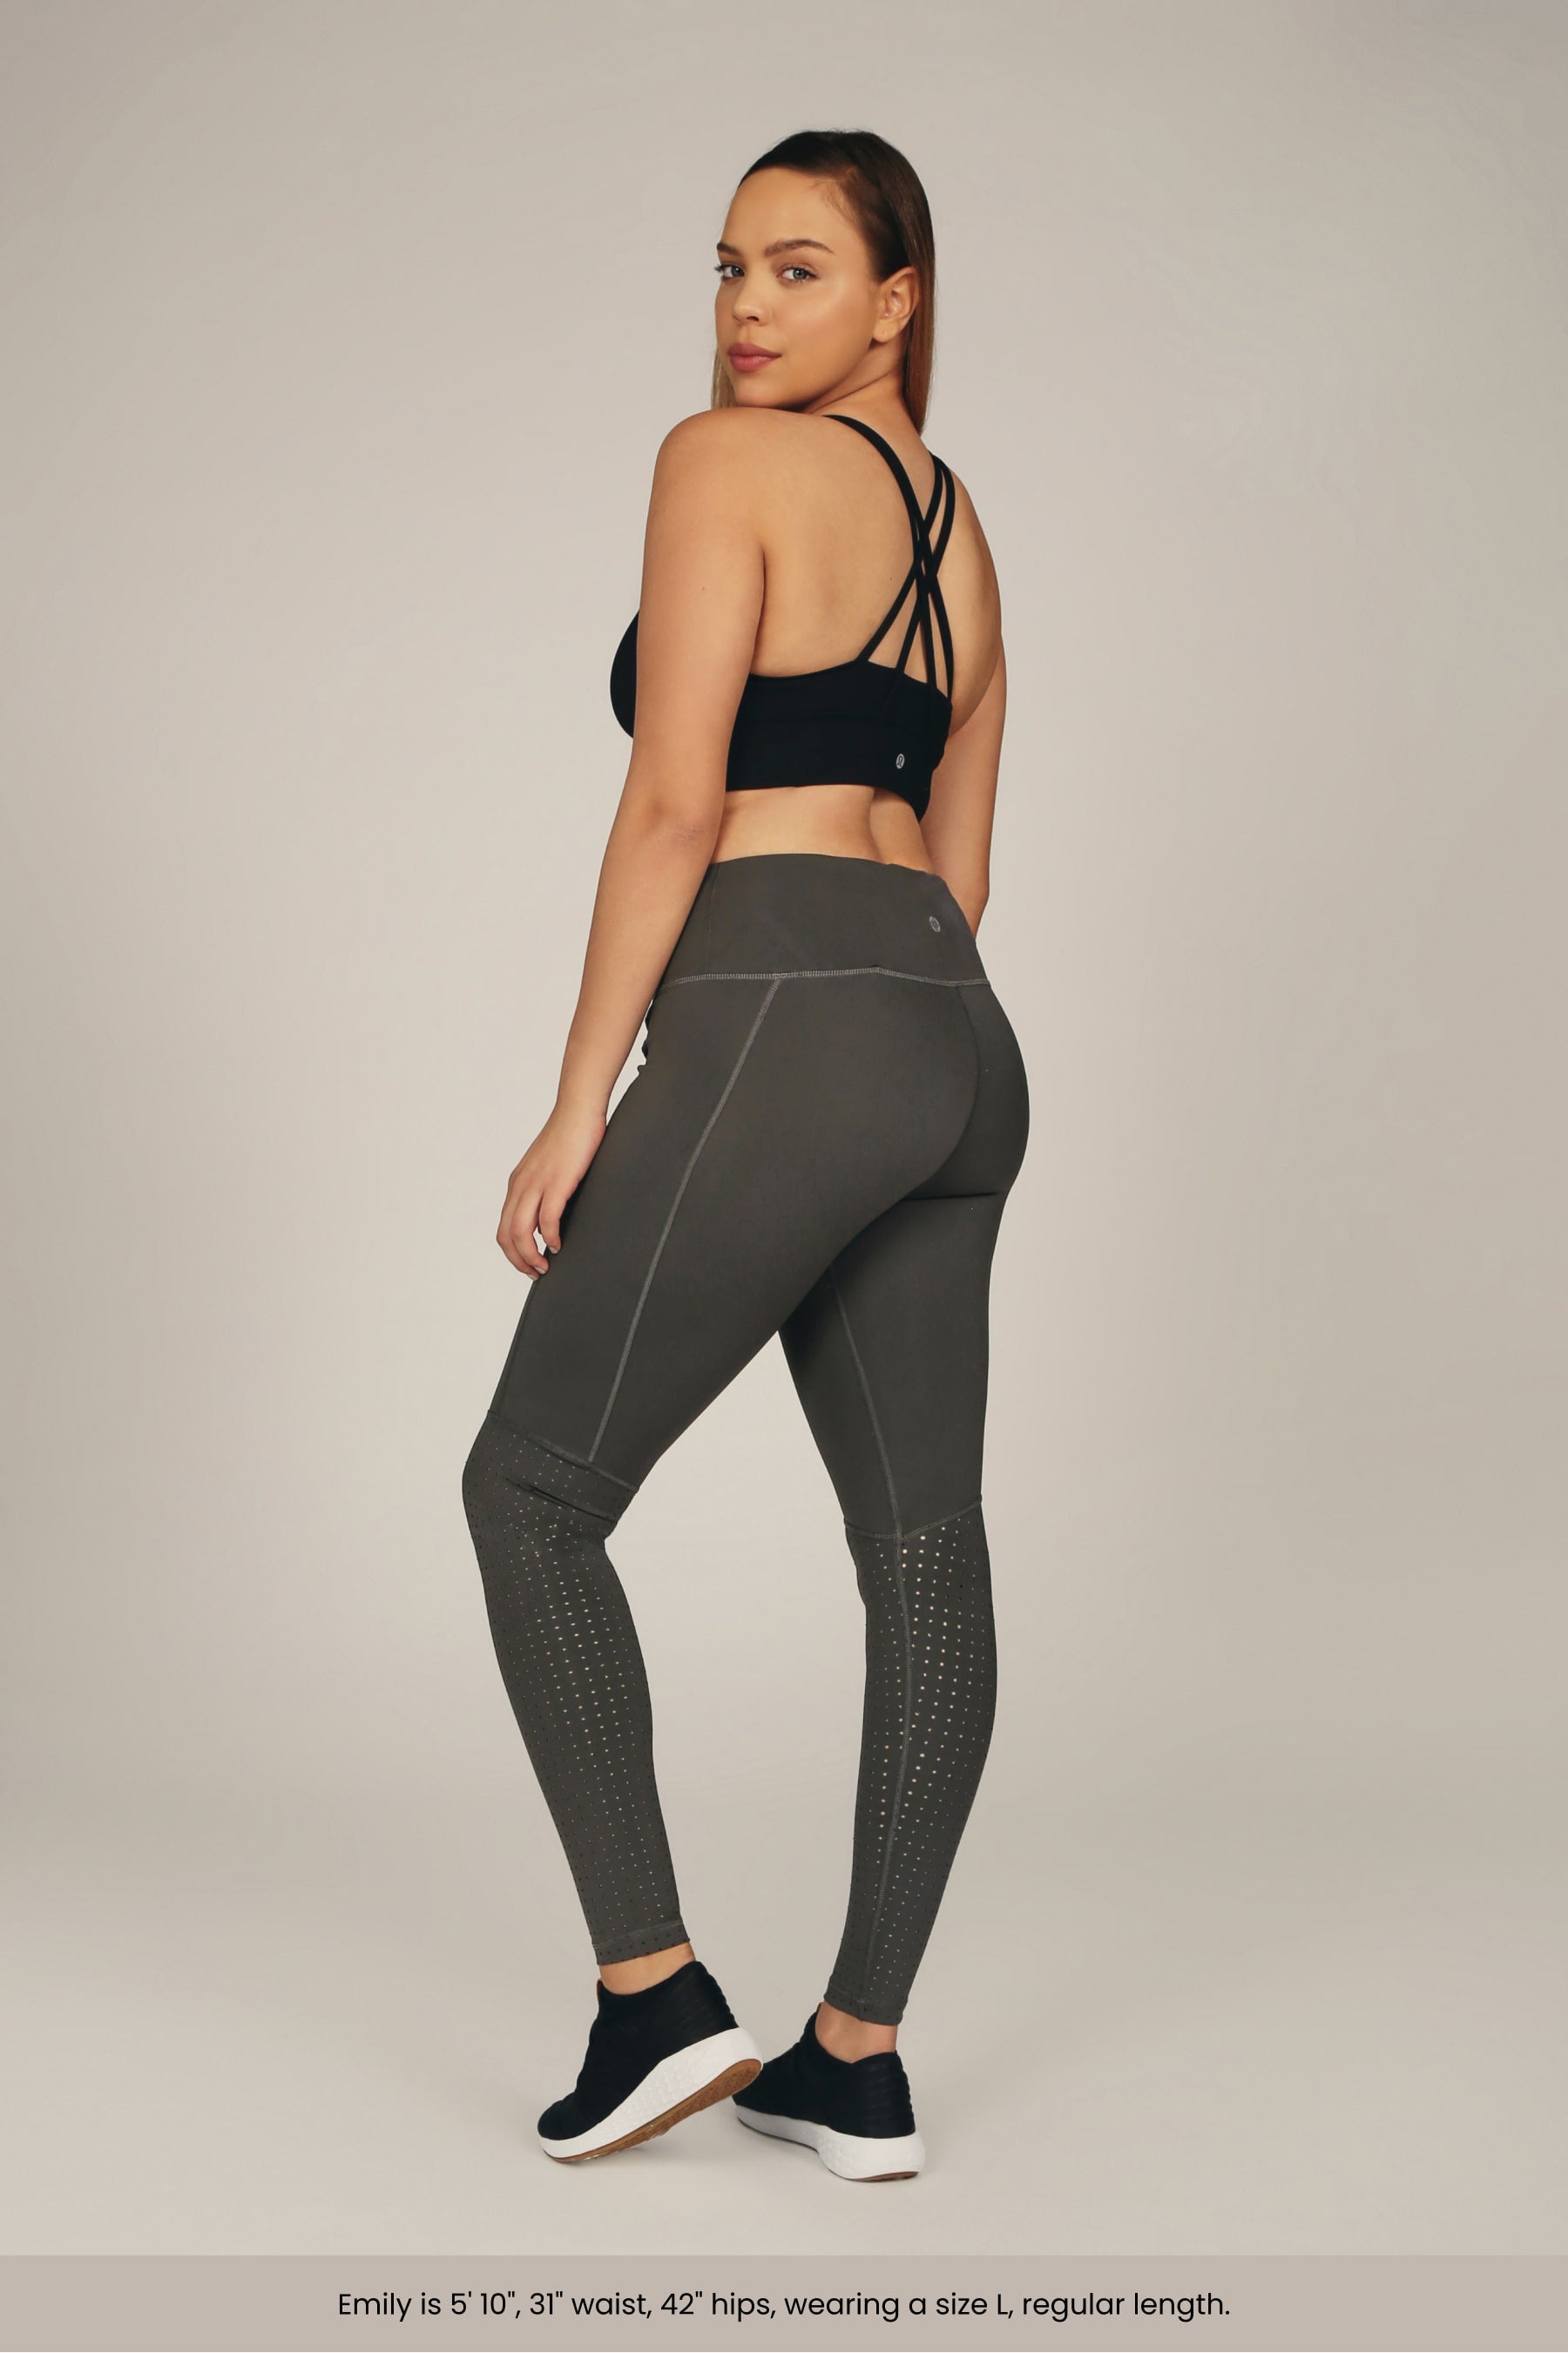 Matalan Body Shaper Leggings:-, They seem to do what they s…